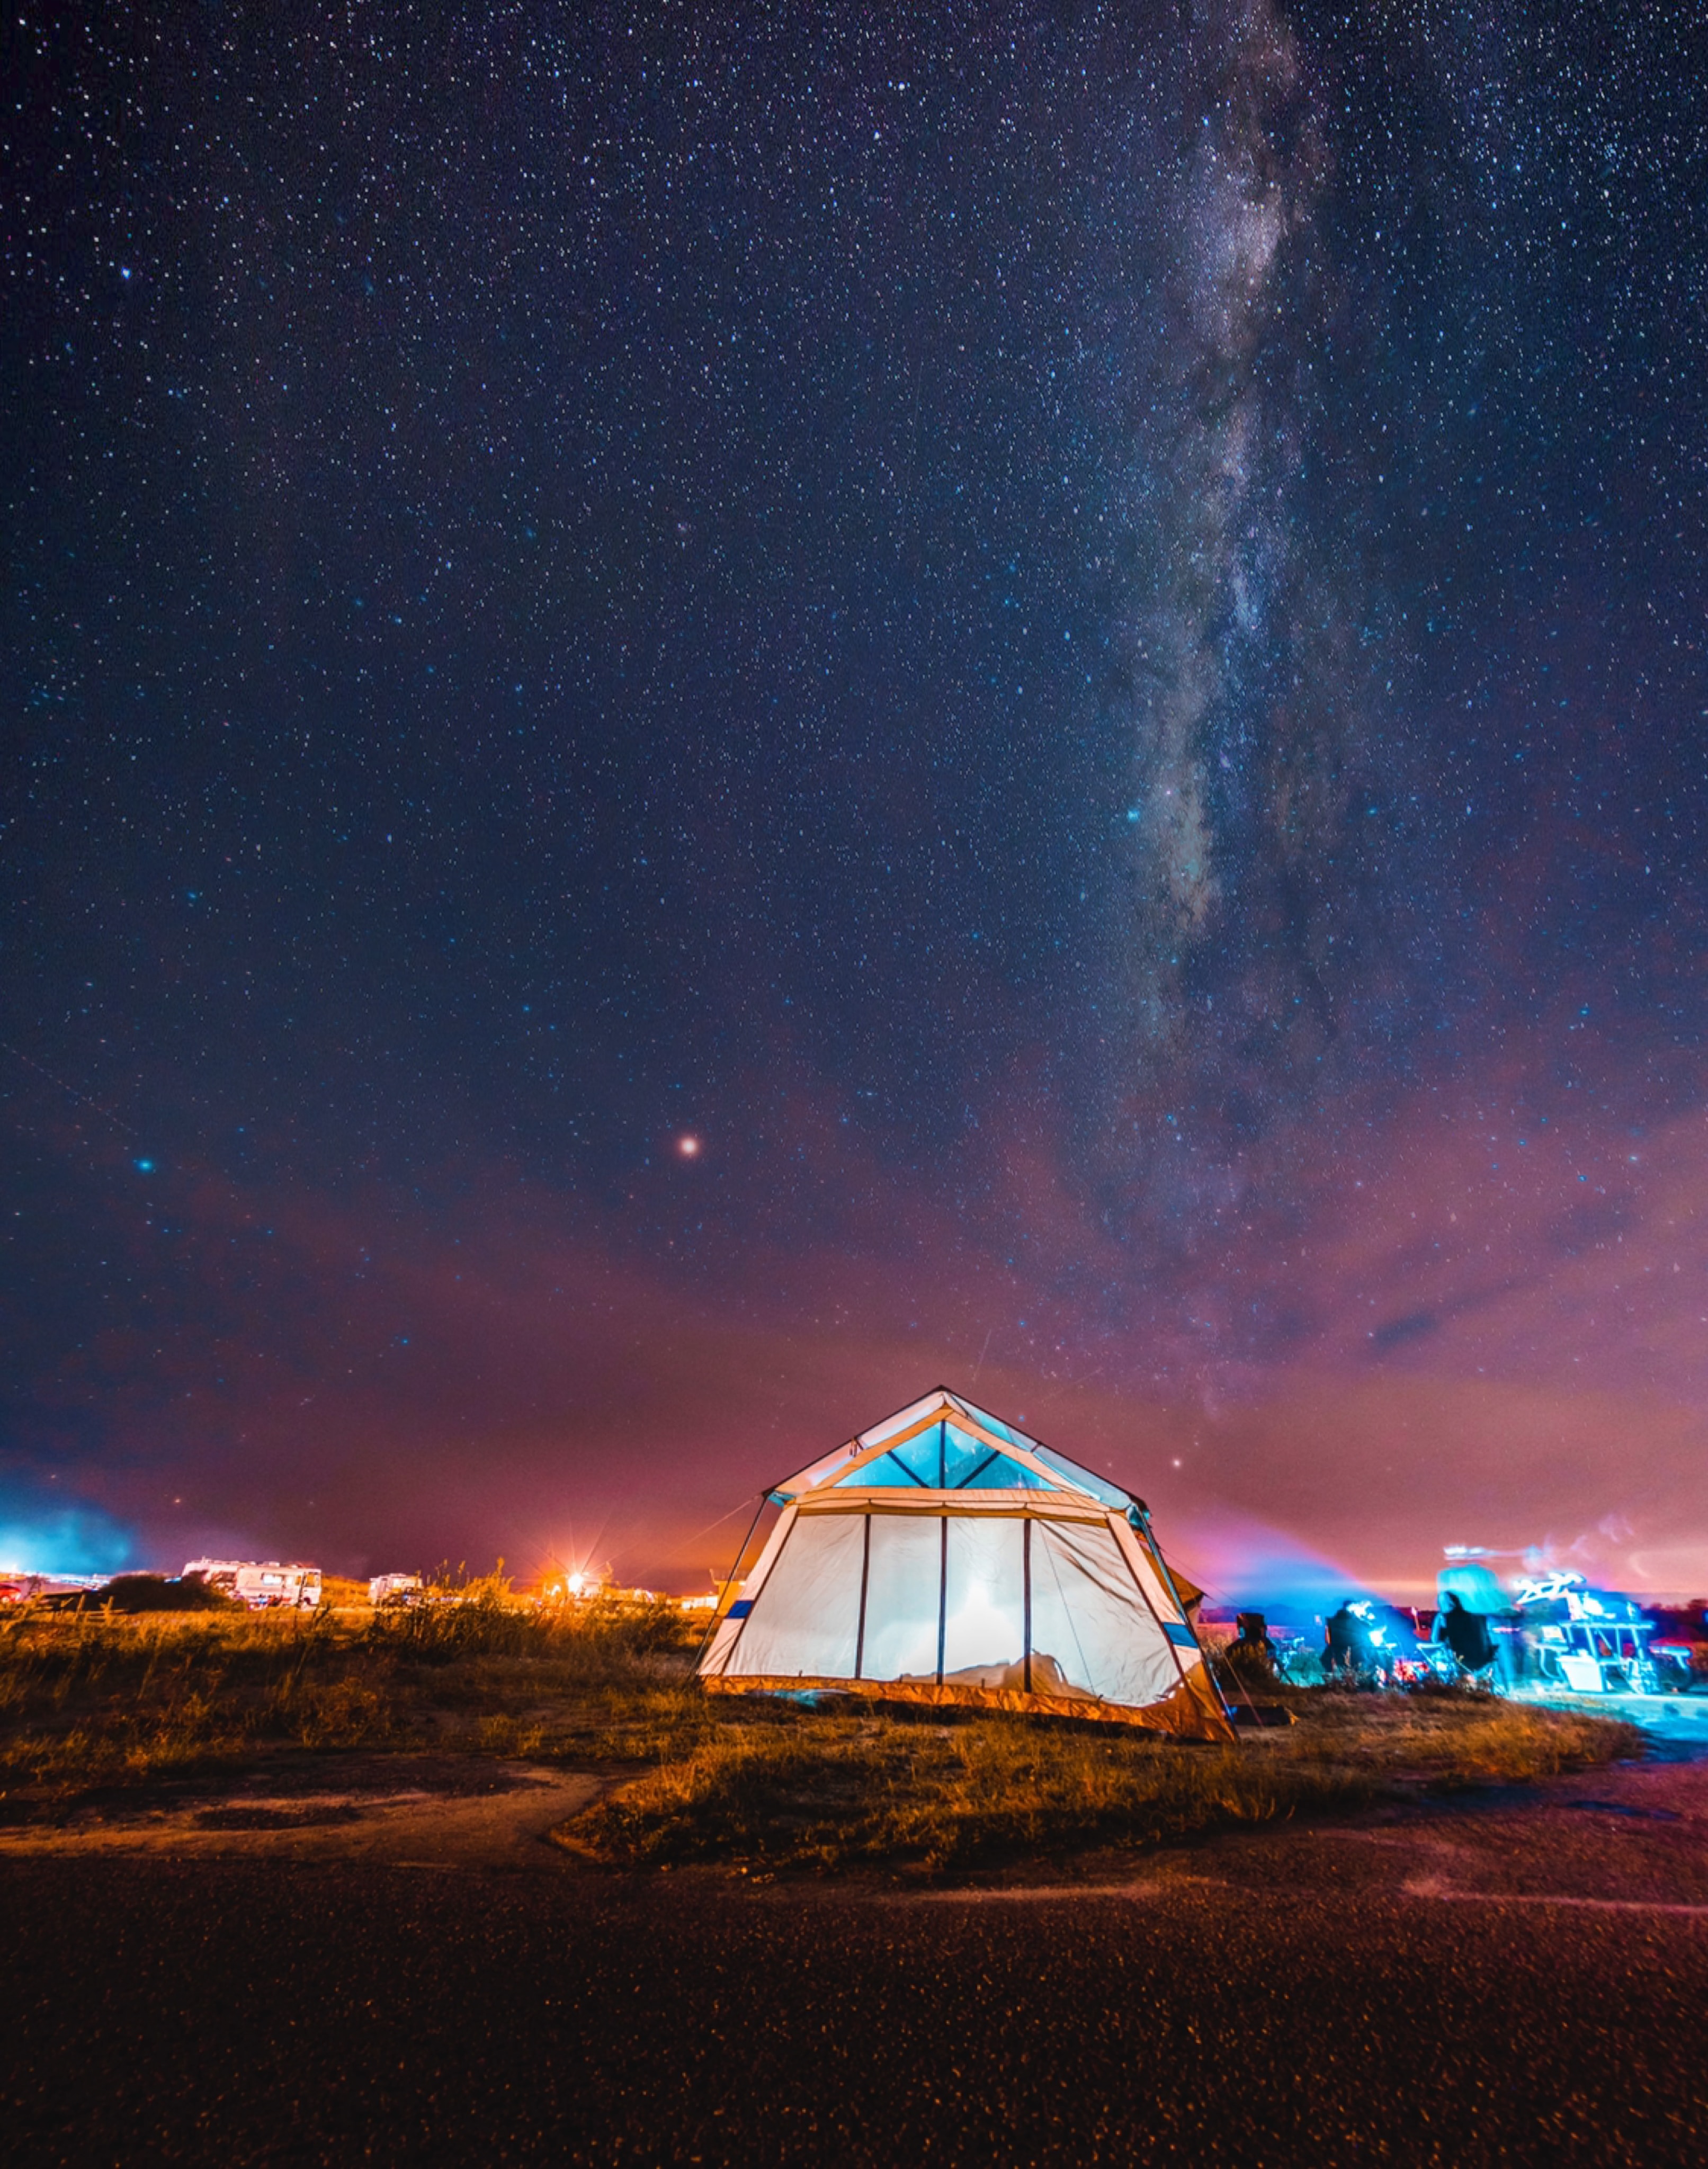 Cool Wallpapers campsite, night, miscellanea, miscellaneous, starry sky, tent, camping